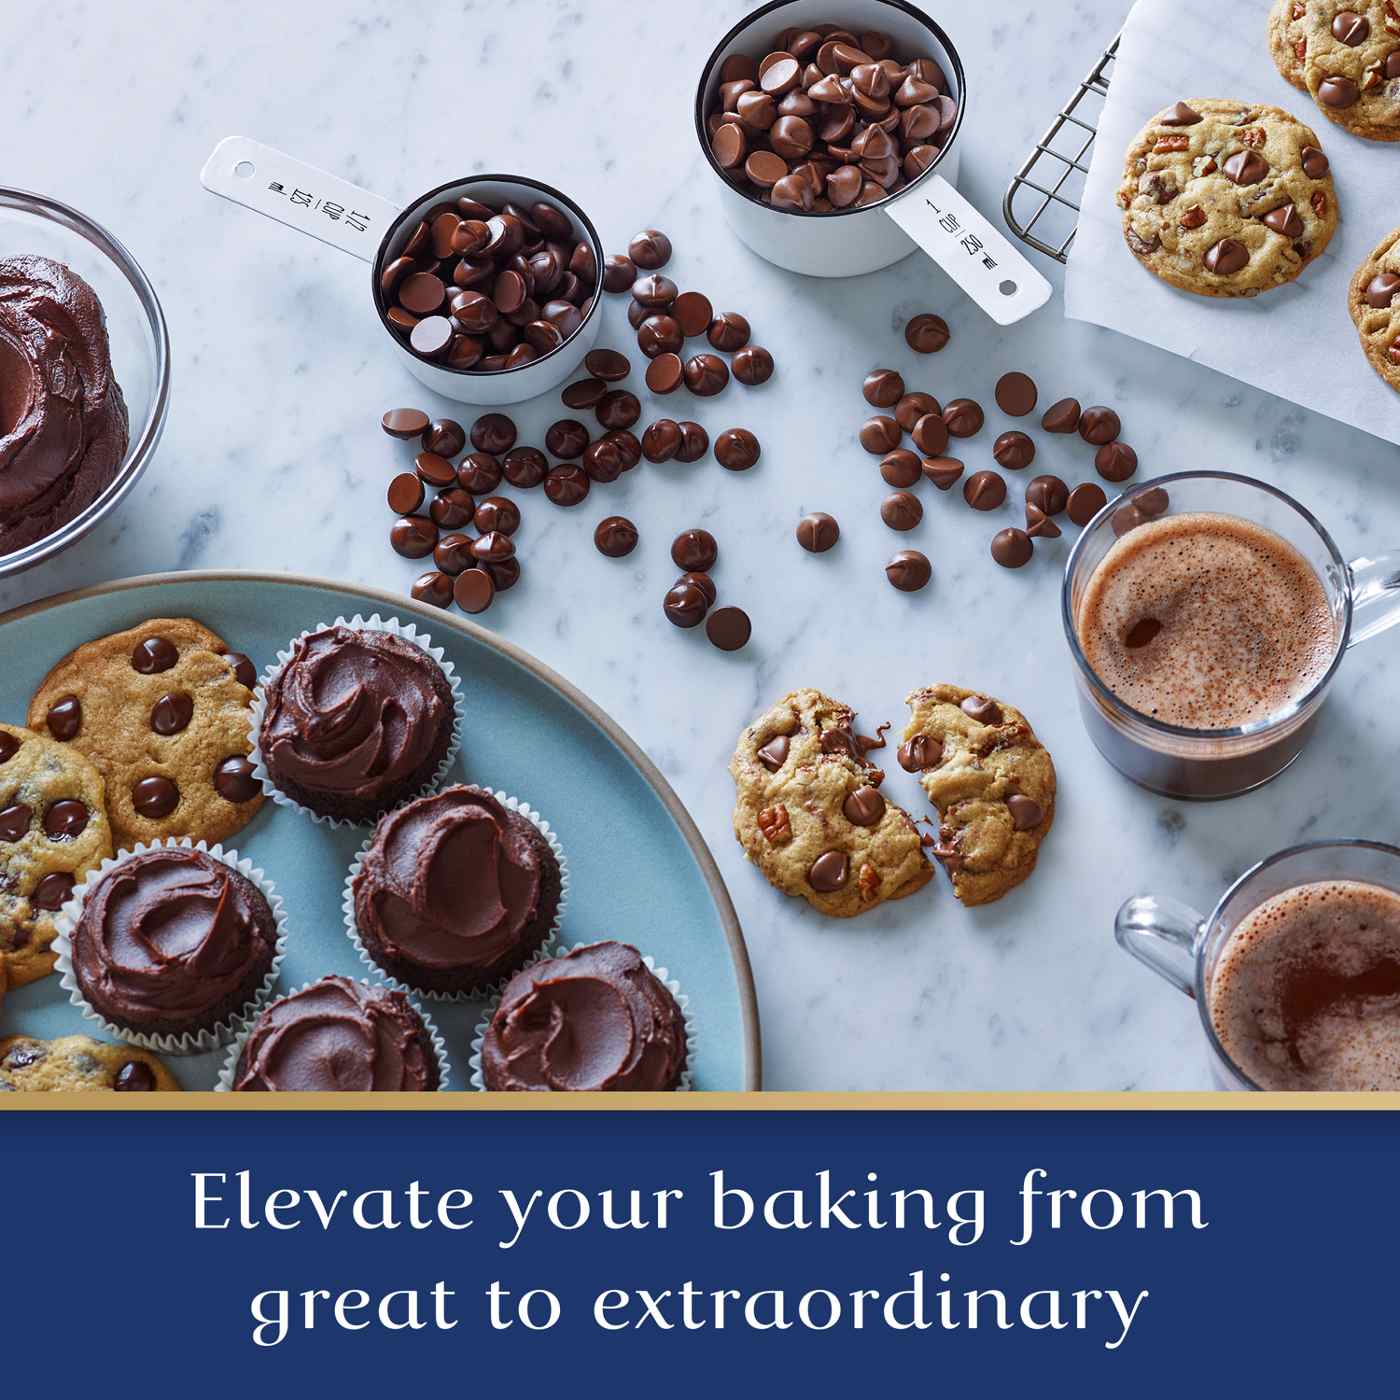 Ghirardelli 100% Cacao Unsweetened Chocolate Chips for Baking, Premium Baking Chips; image 7 of 7